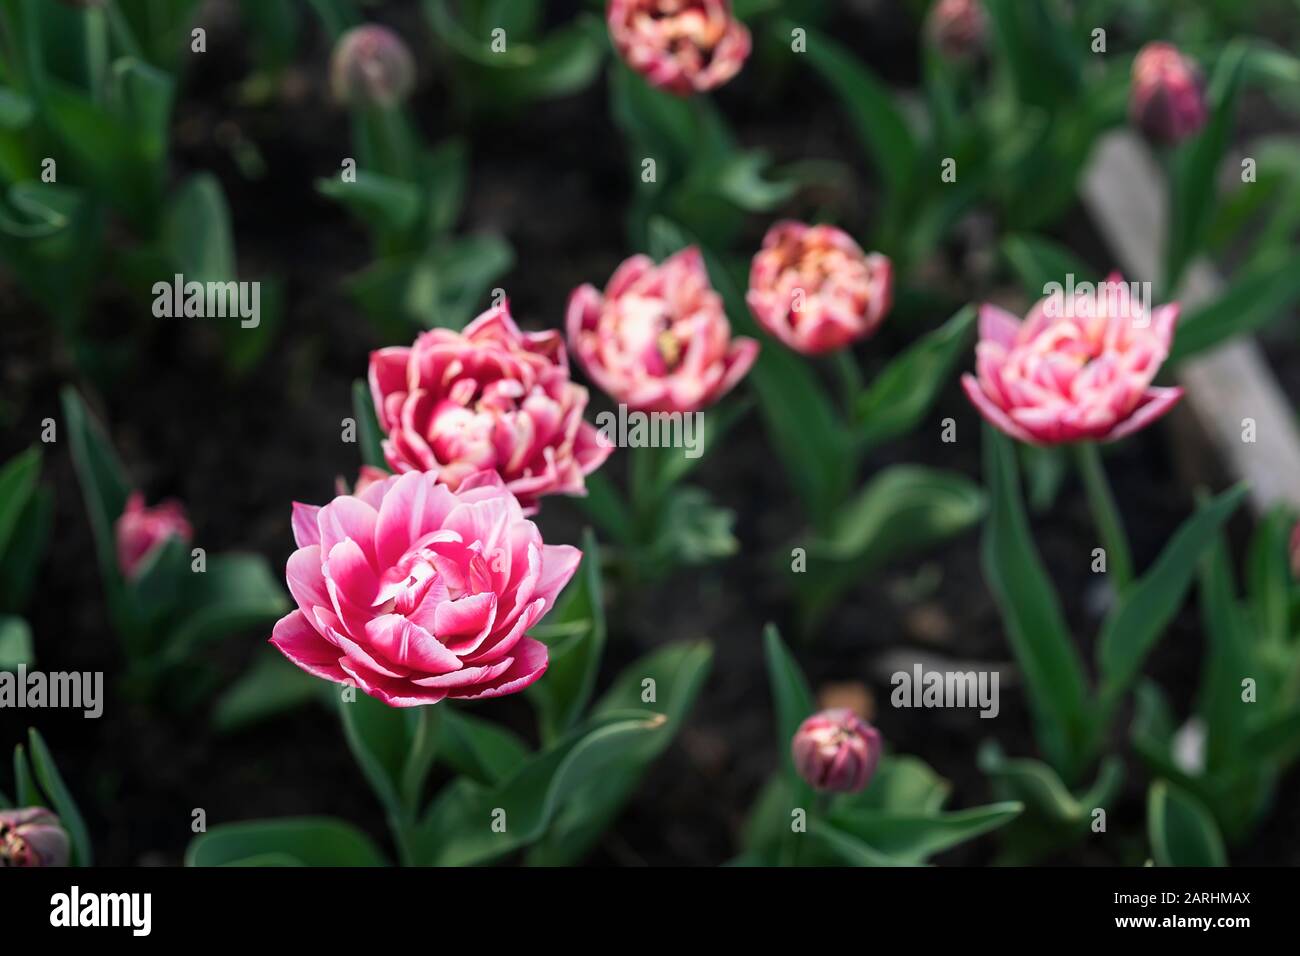 Pink purple varietal tulips, bright flowers blooming in the garden park. Natural spring background Stock Photo